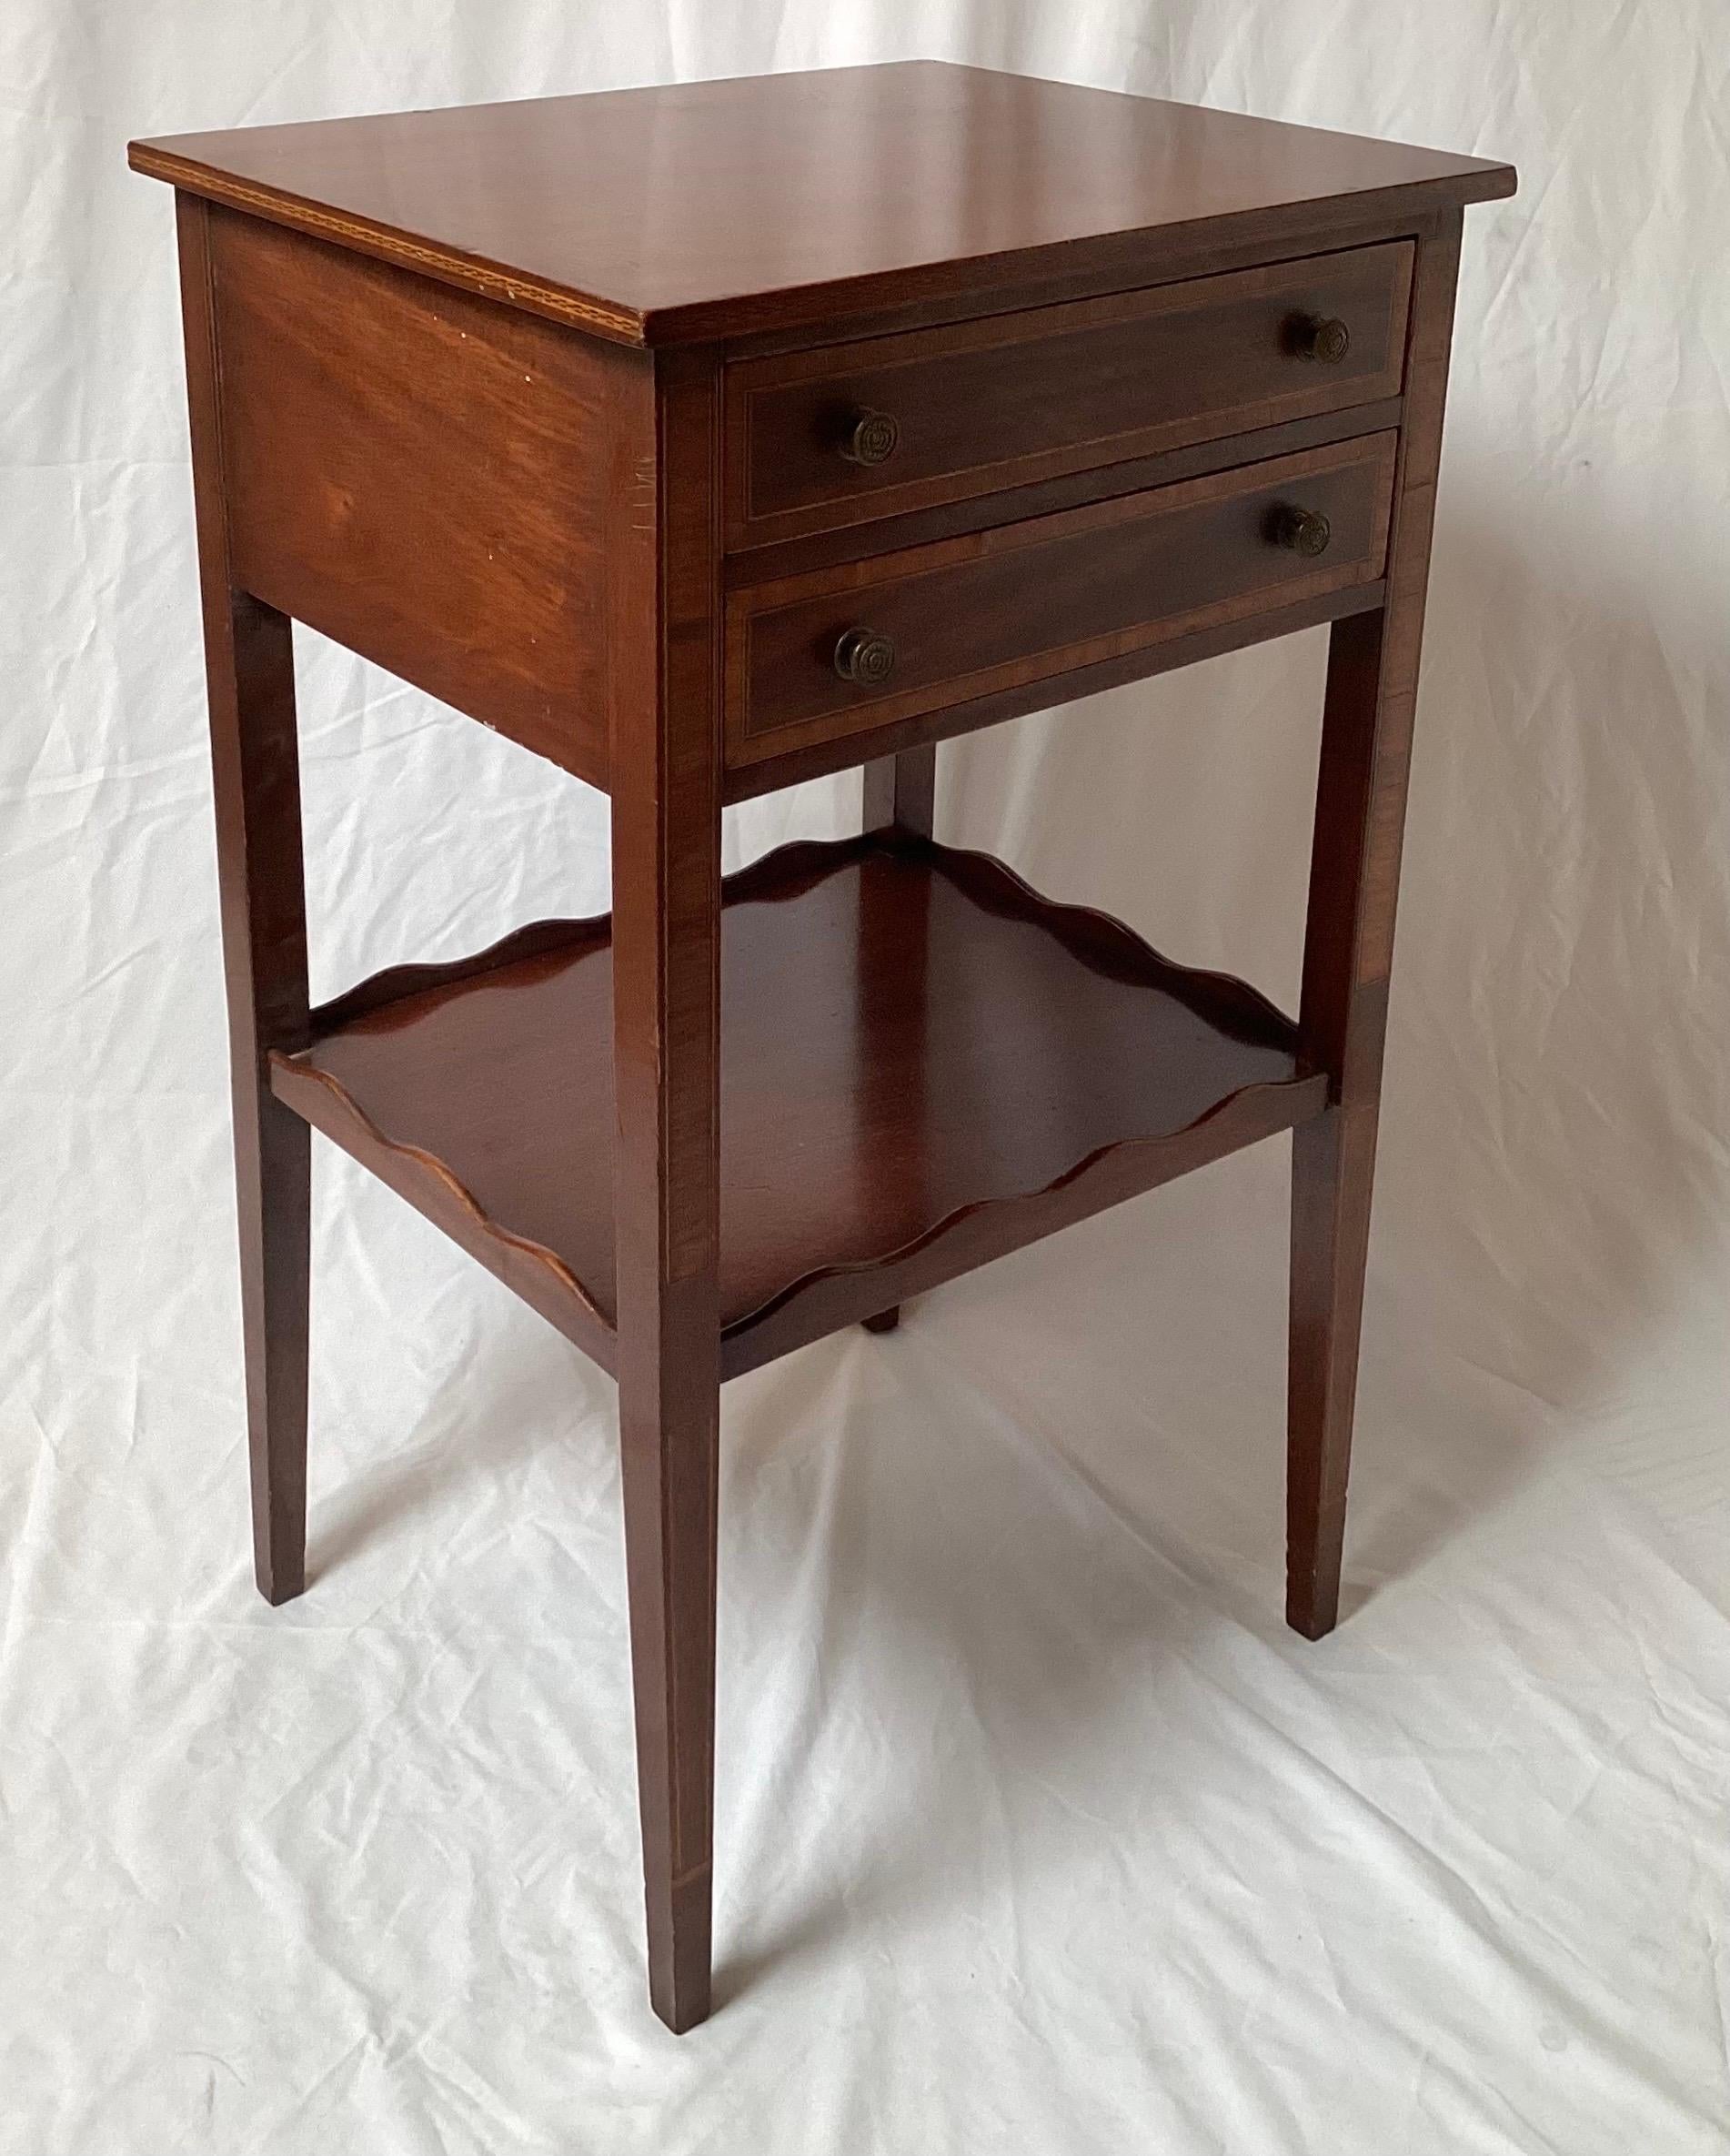 Early 20th Century A Pair of Federal Style Mahogany Side Tables.  